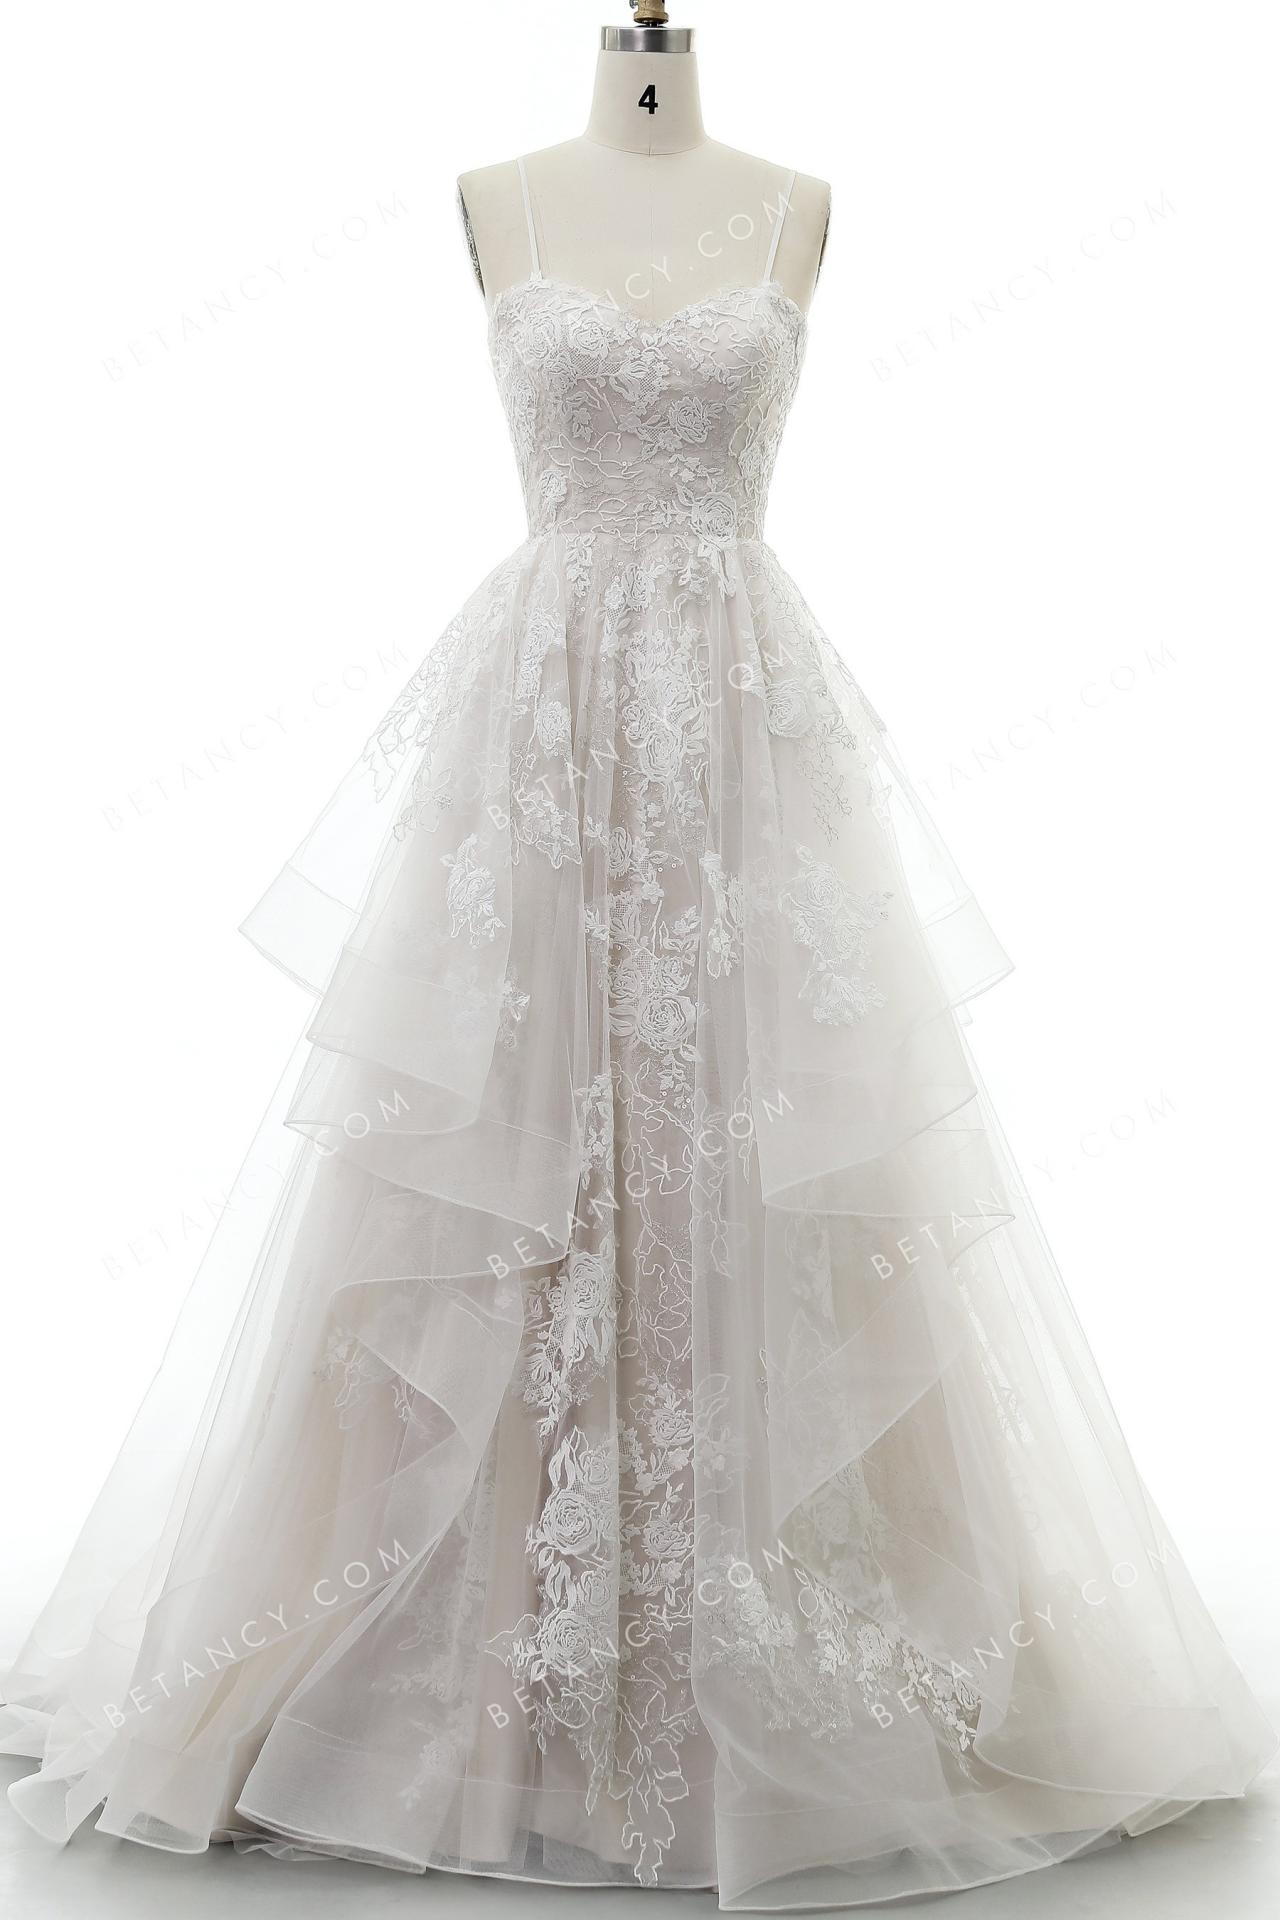 Lovely spaghetti strap wedding gown accented in embroidered appliques 7